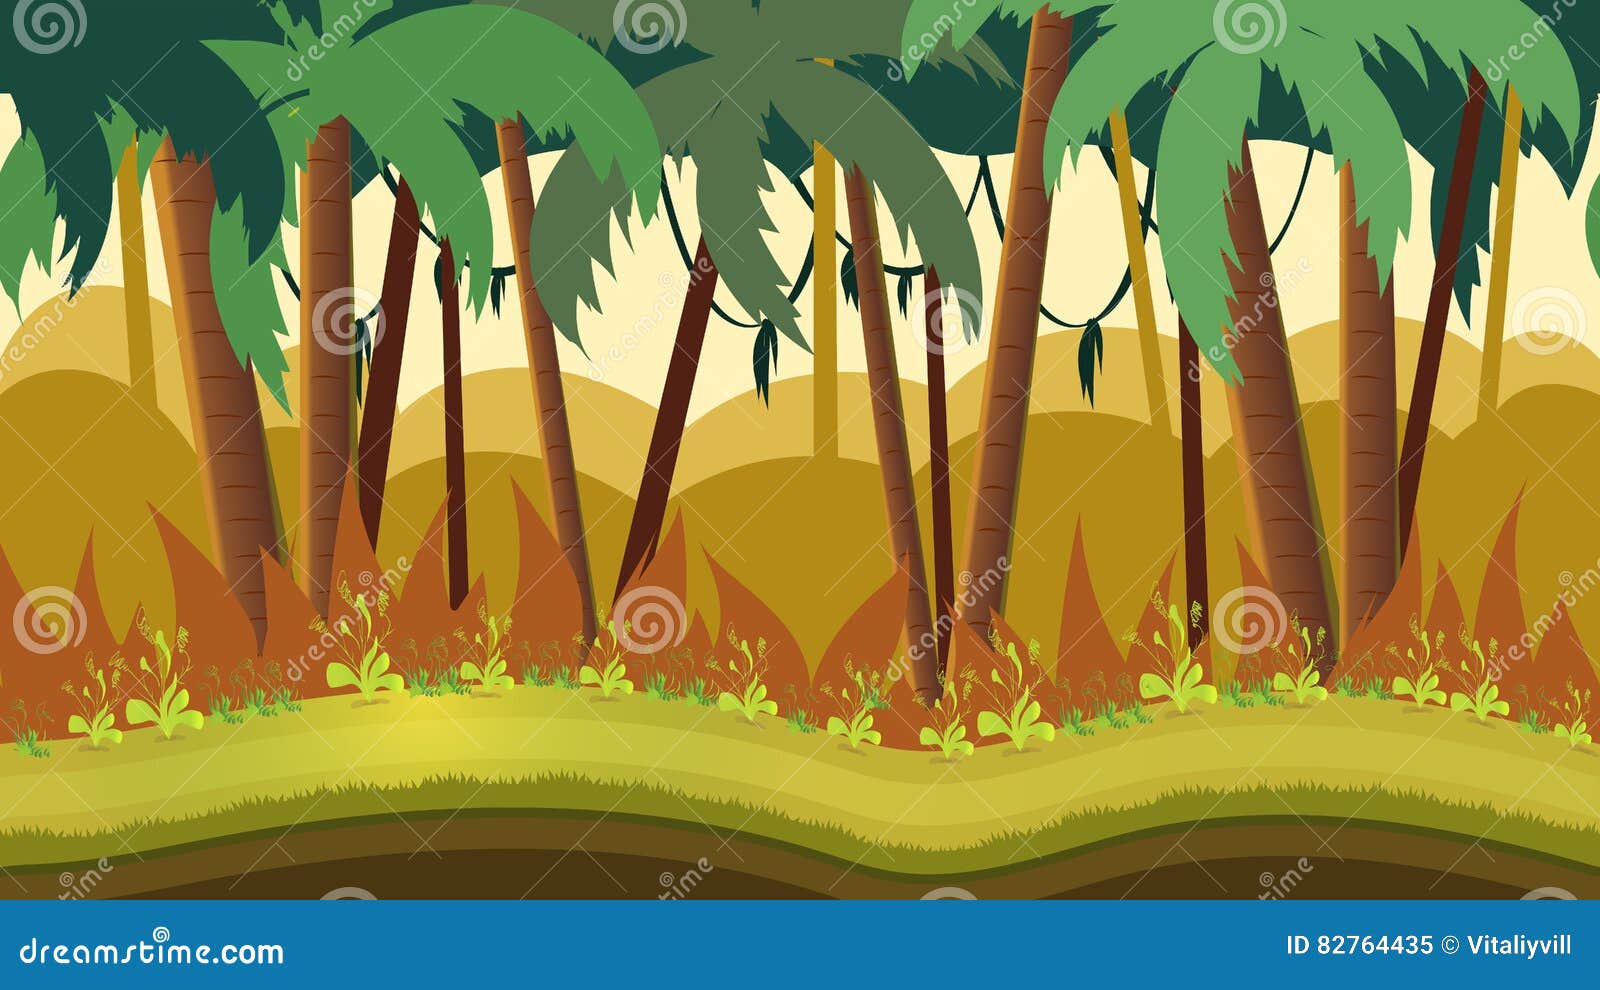 background for games apps or mobile development. cartoon nature landscape with jungle. size 1920x1080